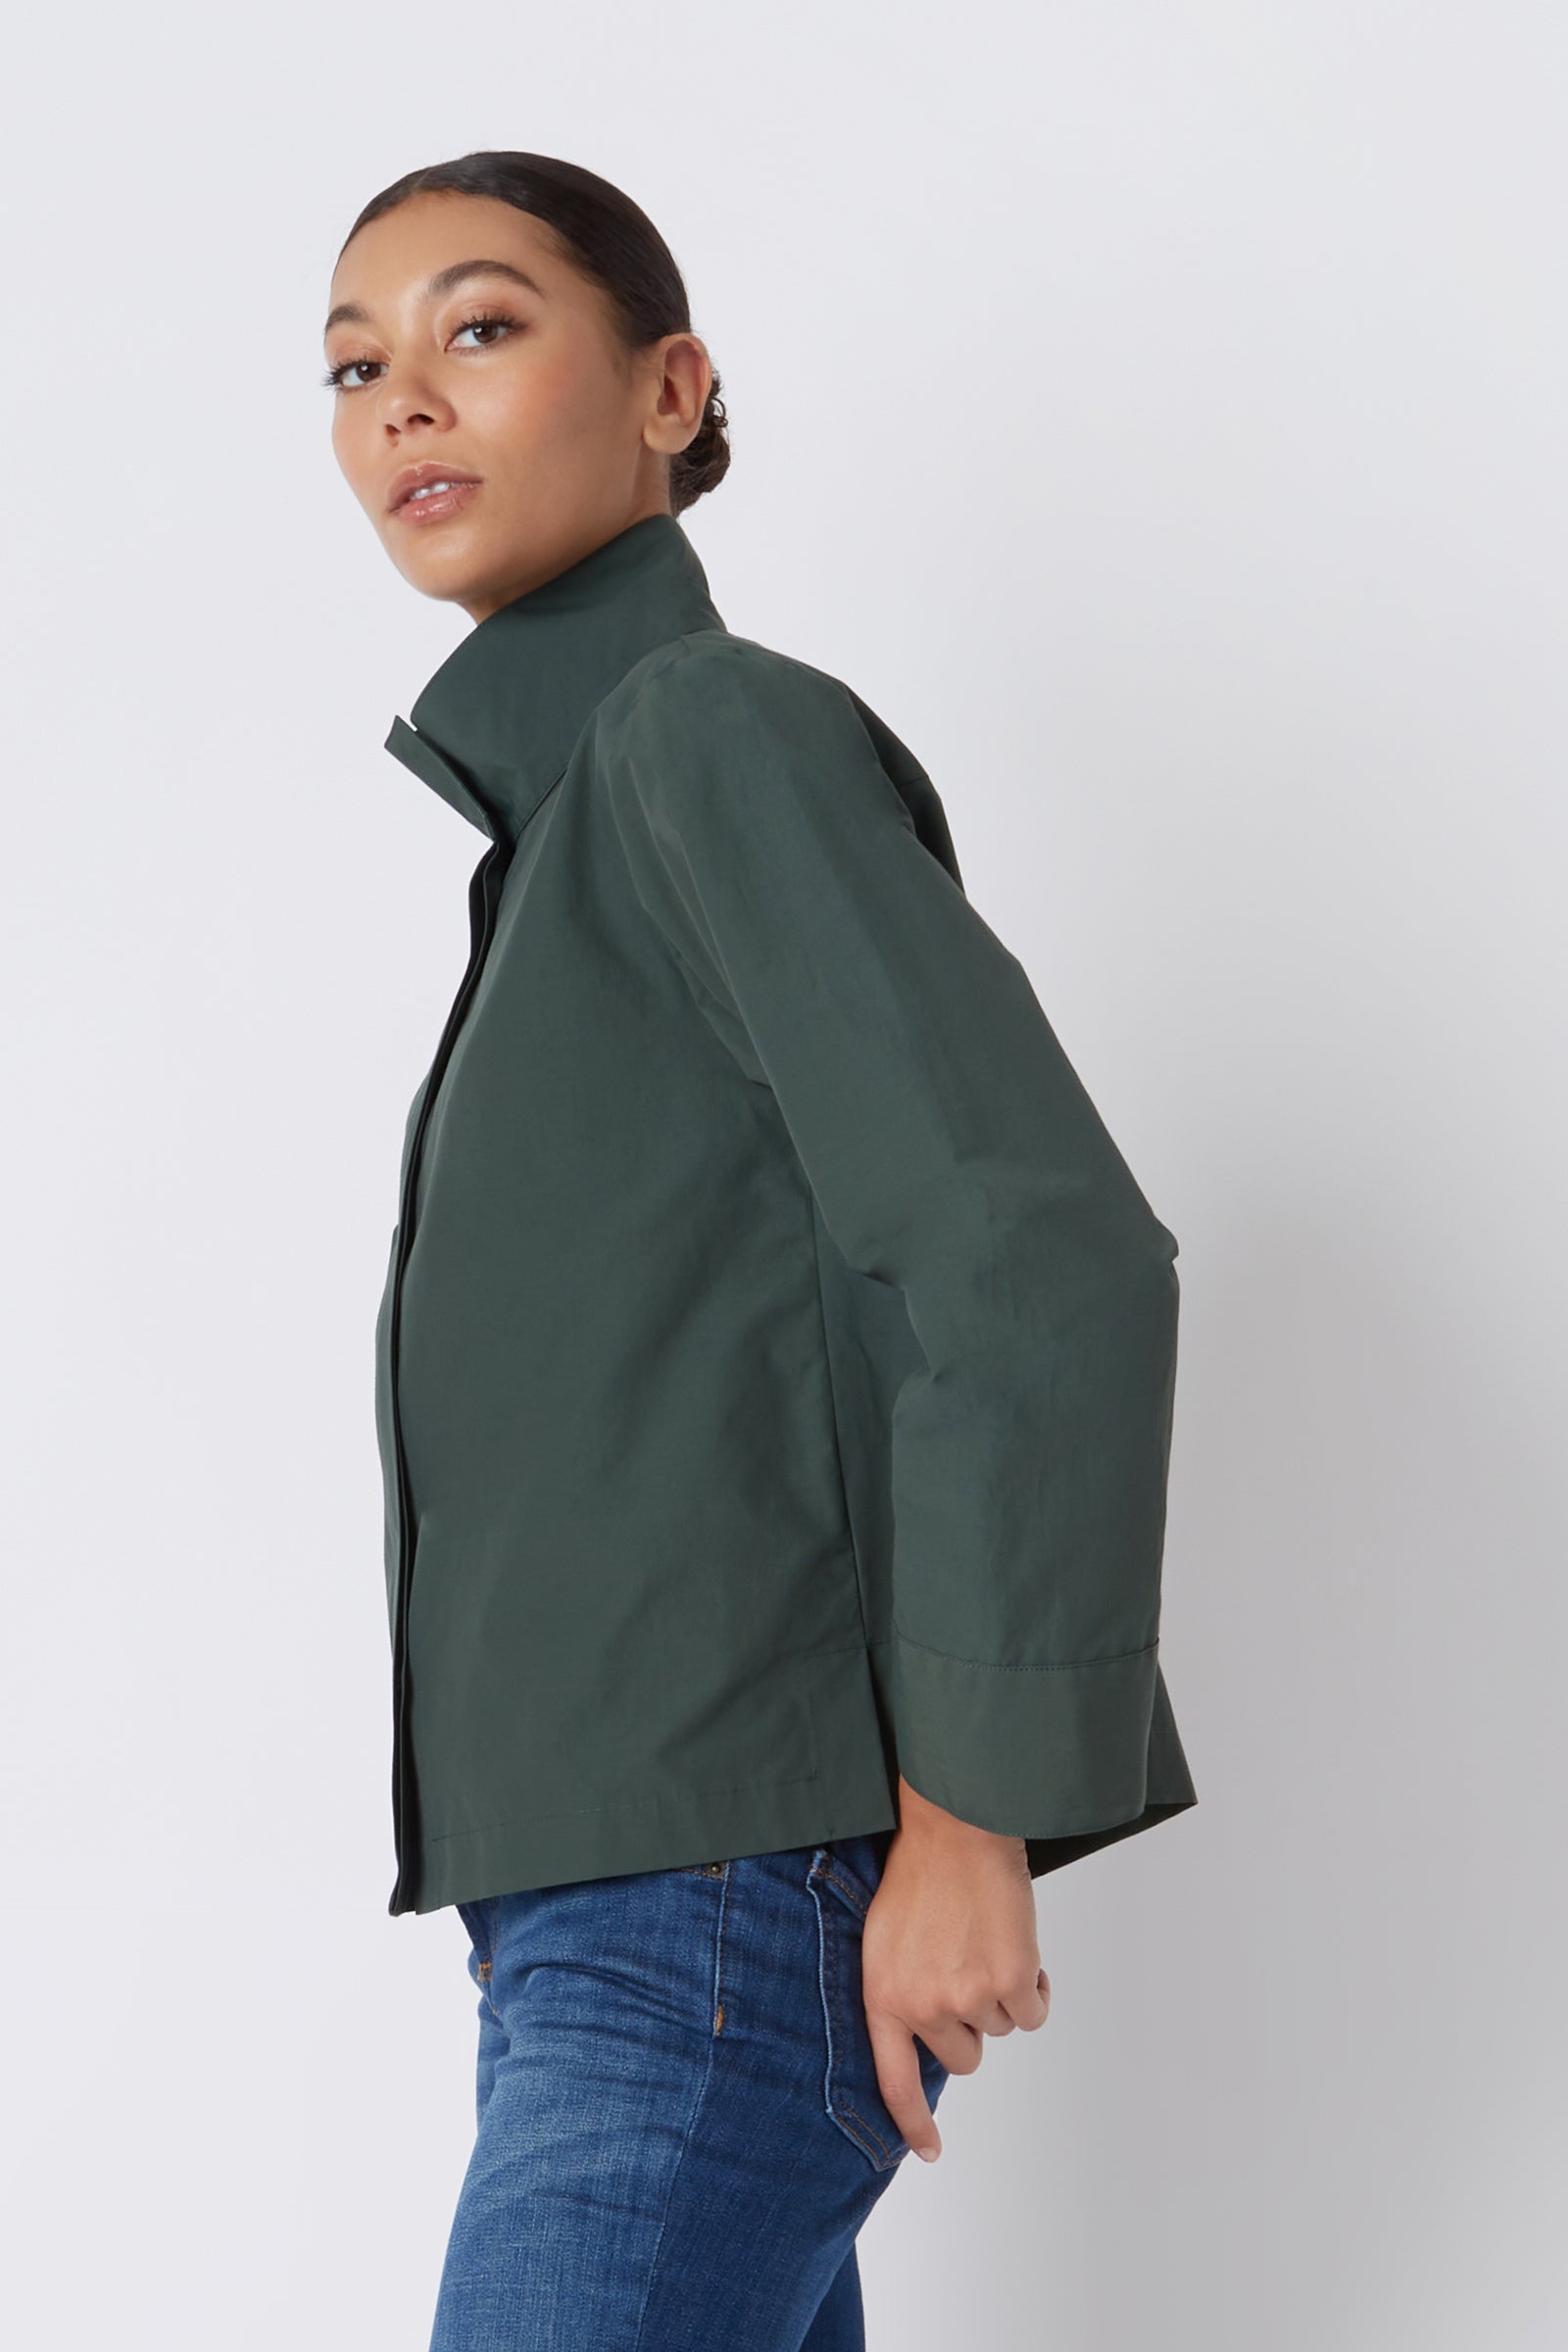 Kal Rieman Peggy Collared Shirt in Loden Broadcloth on Model Cropped Side View